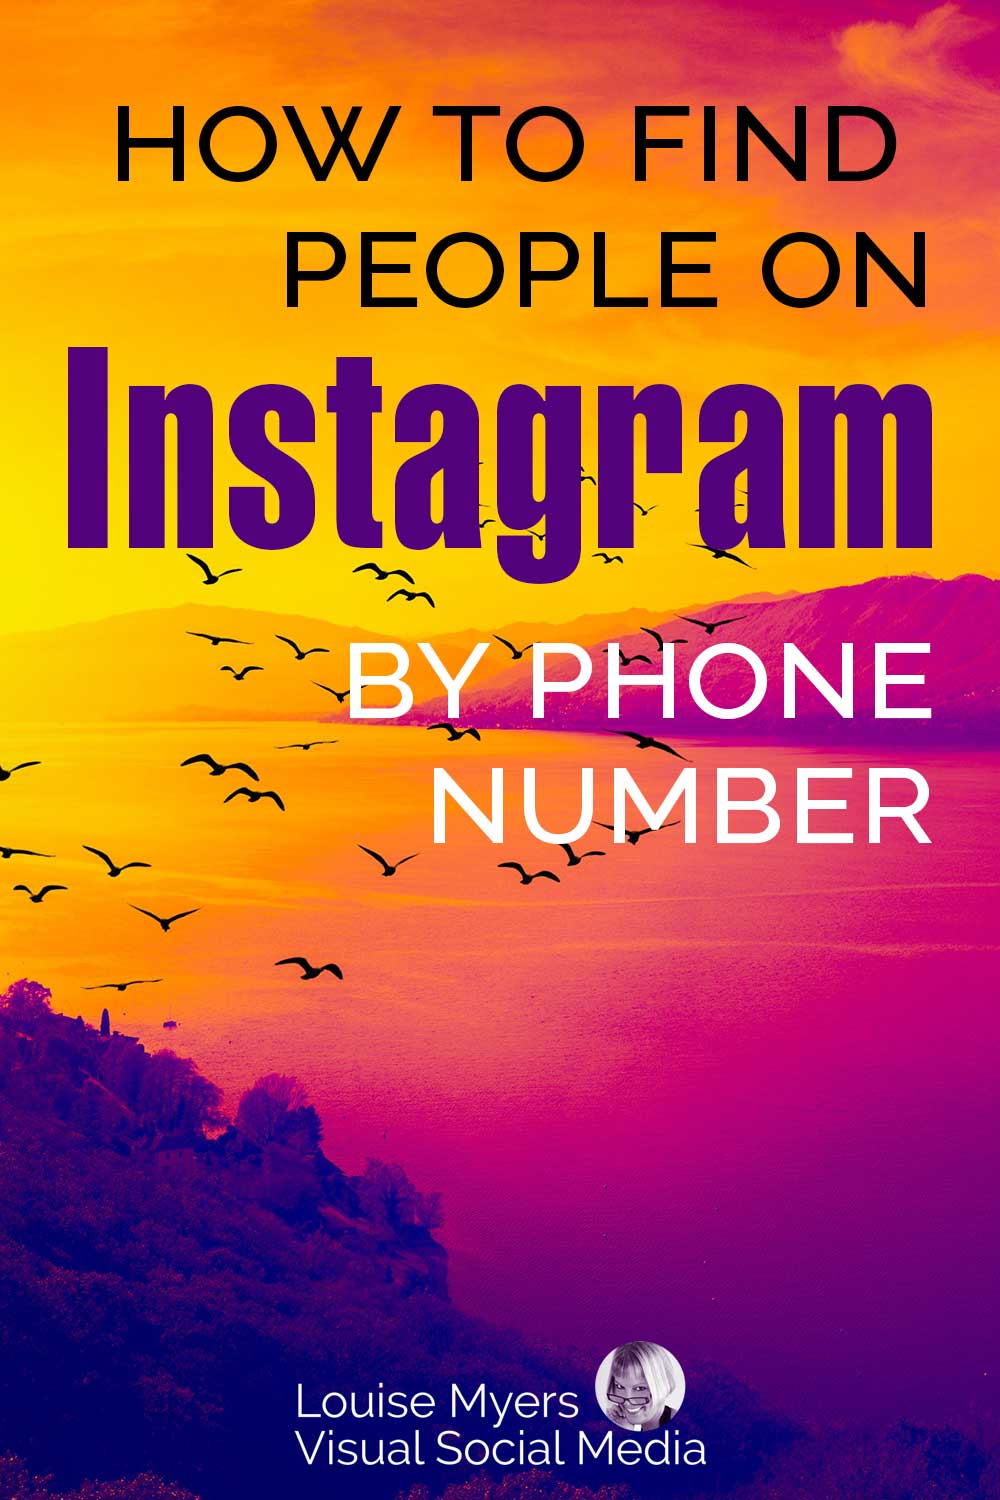 Instagram colored seascape in yellow orange fuchsia and purple has birds flying and text how to find people on IG by phone number.